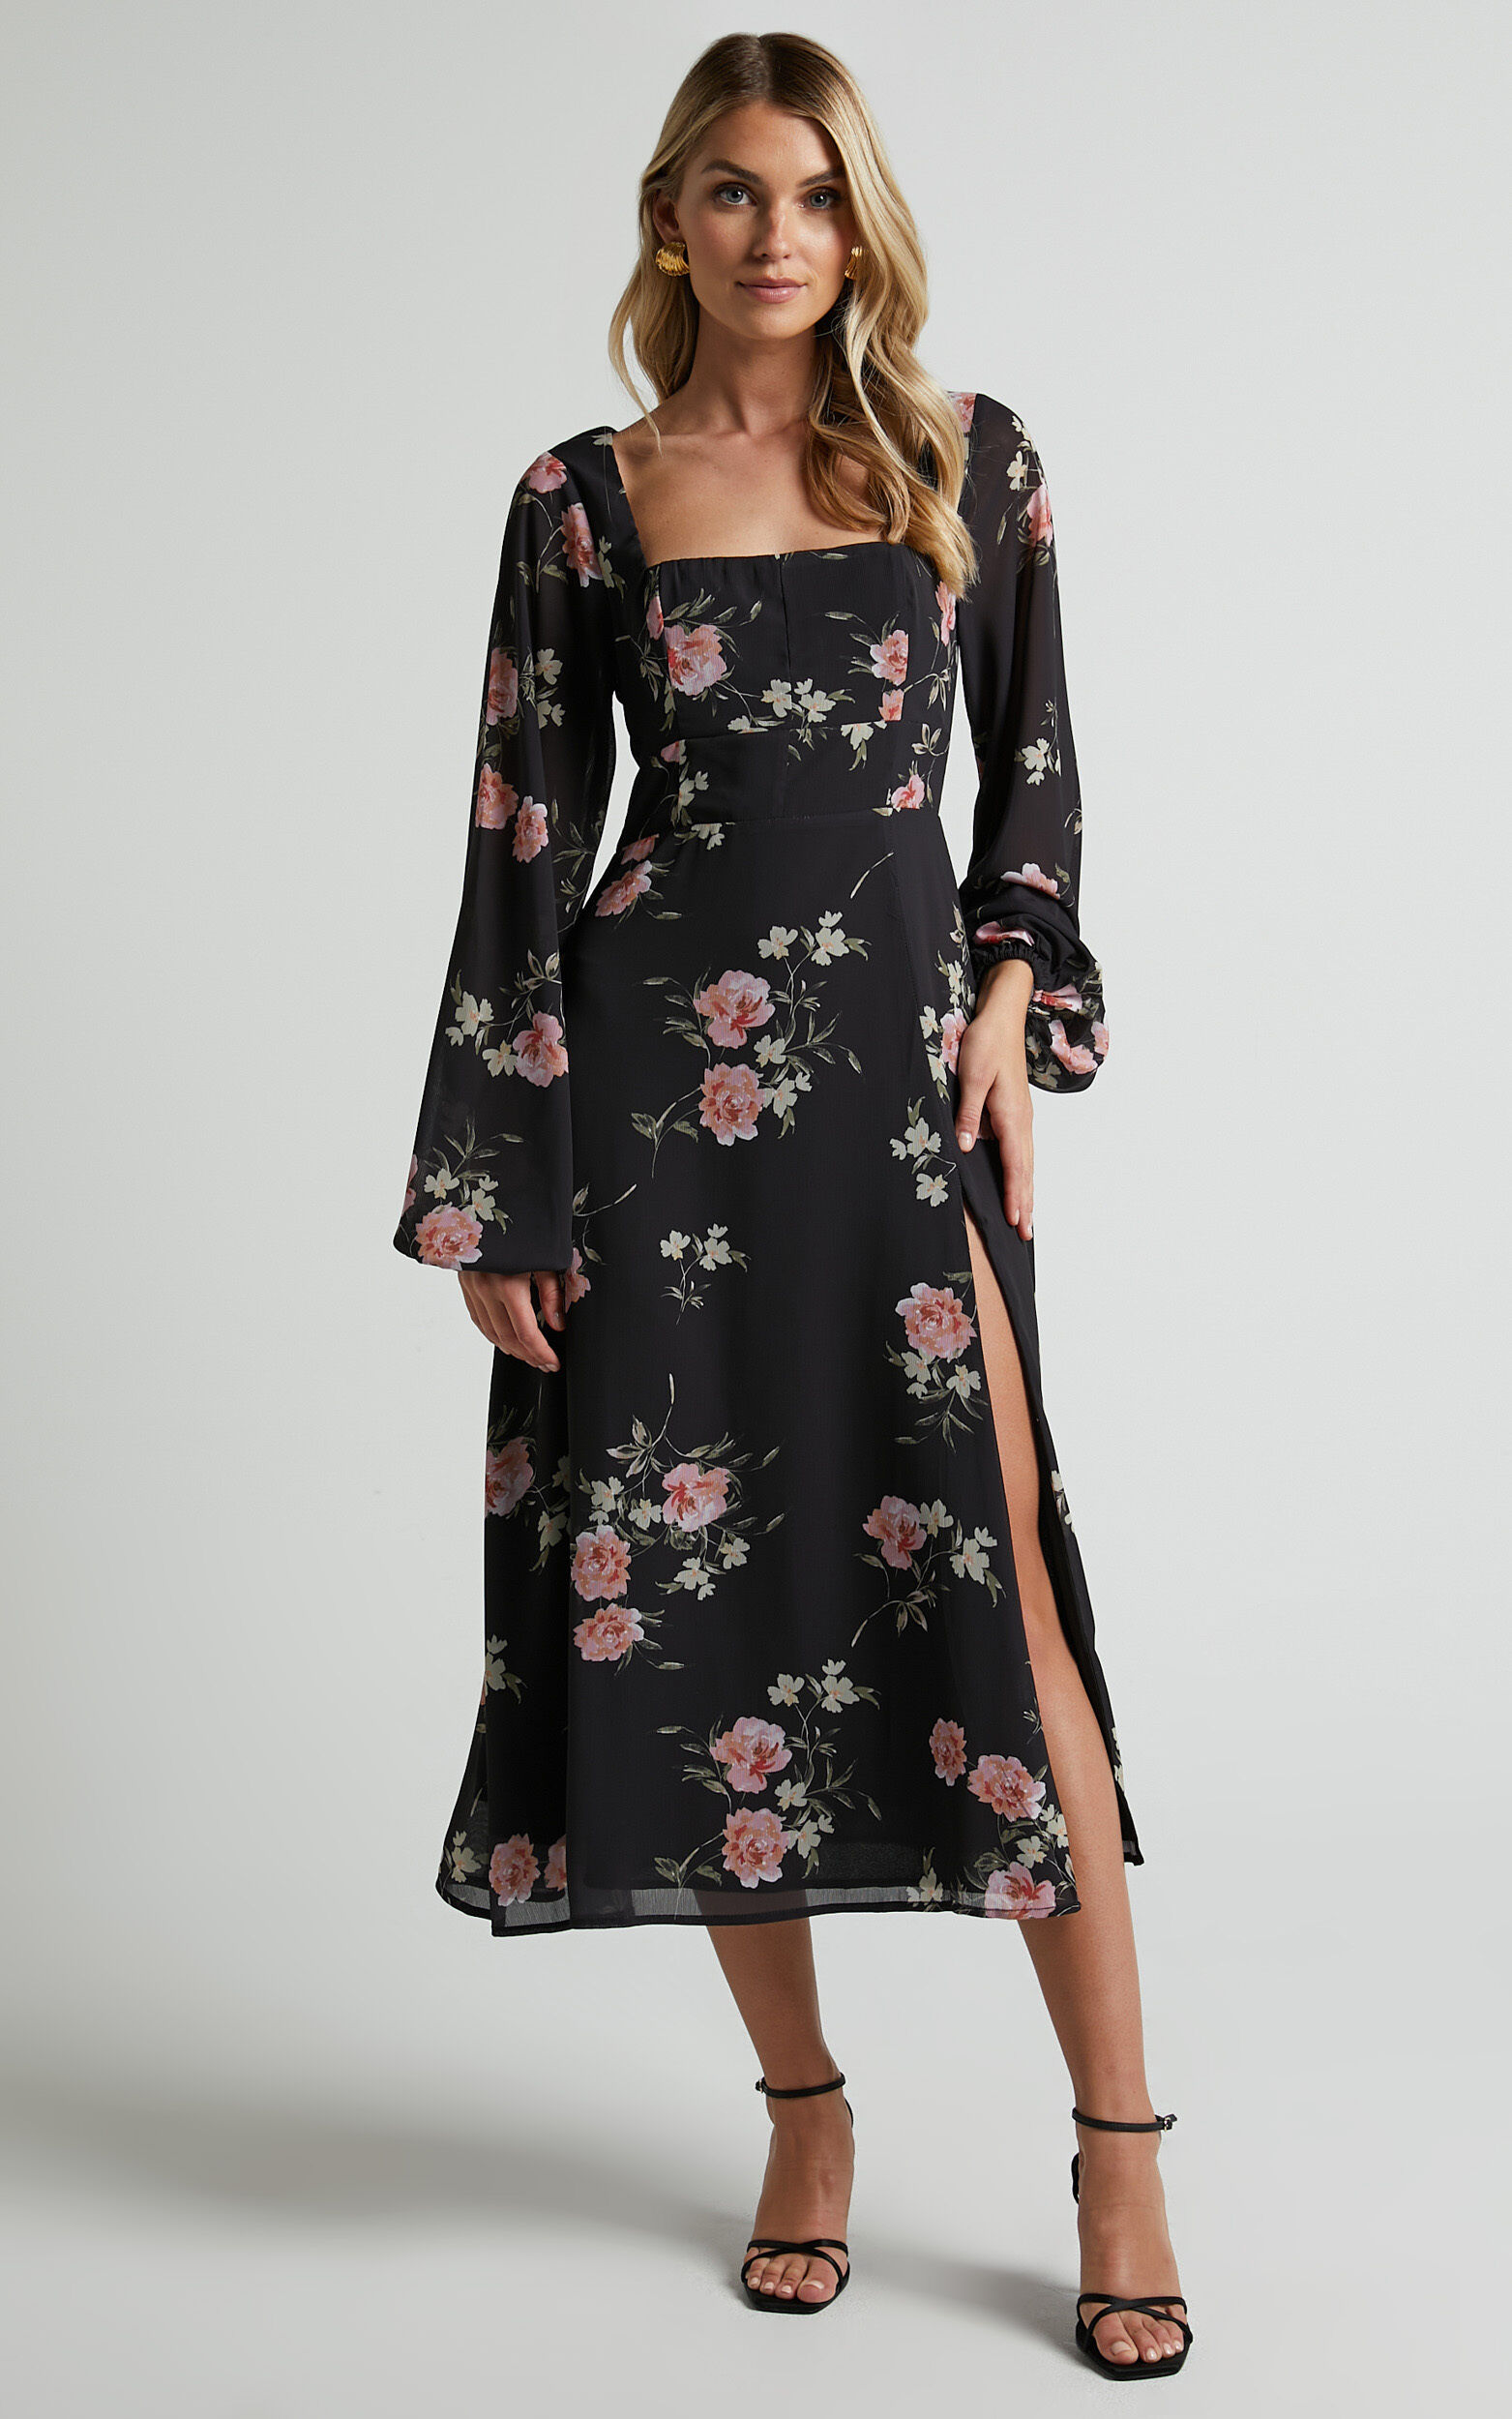 Tionna Dress - Long Sleeve Midi Dress in Blushing Floral - 04, BLK1